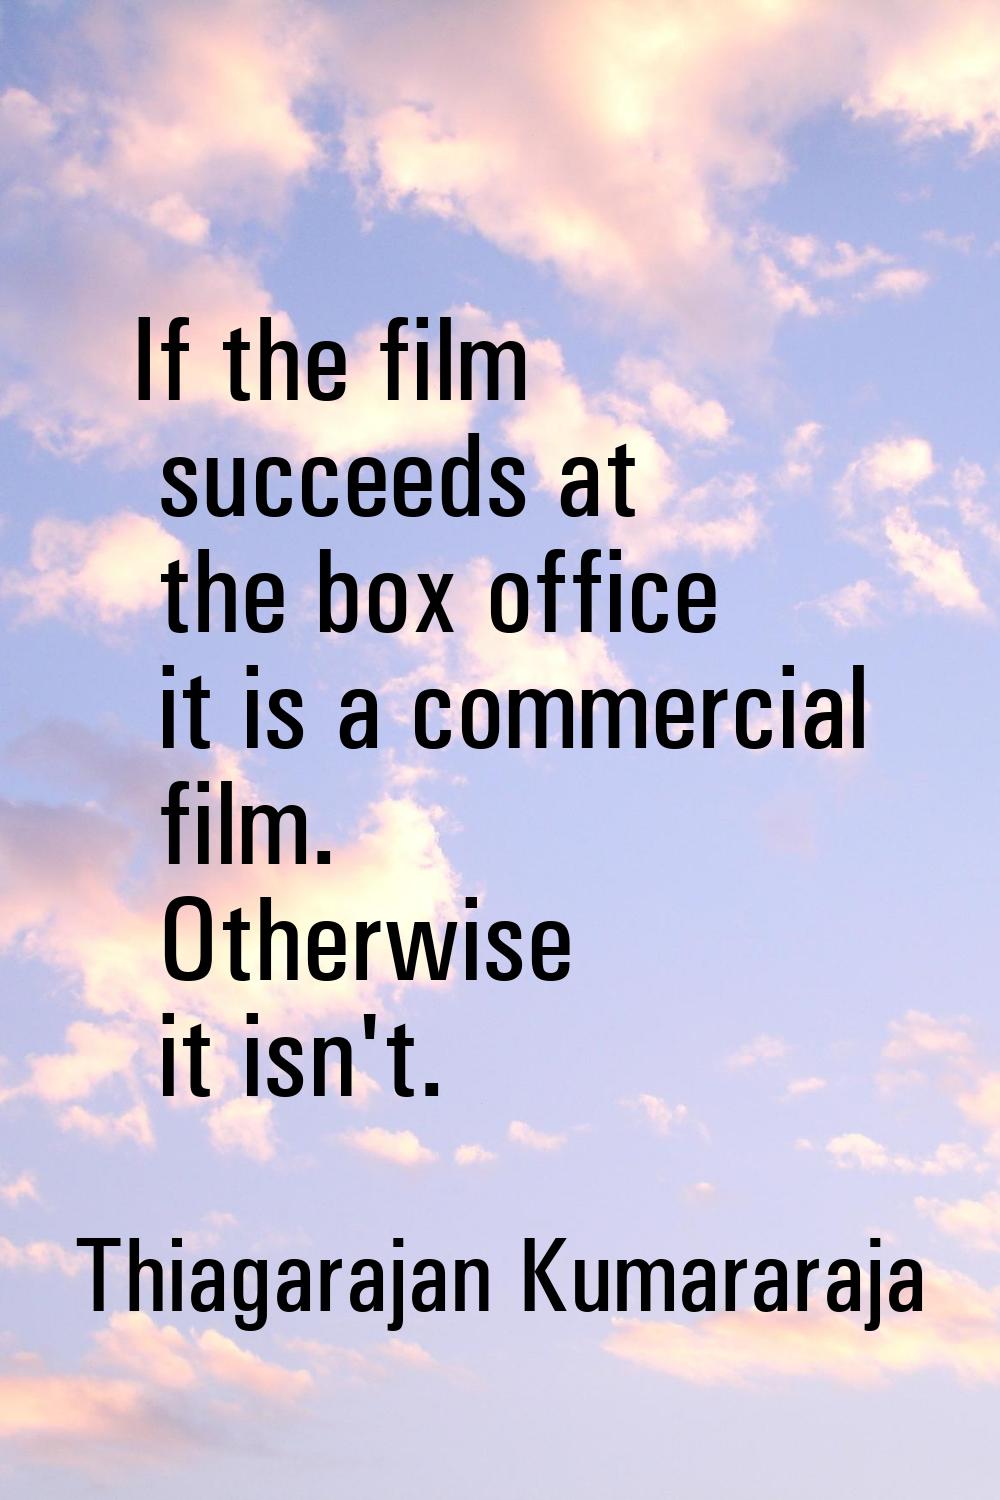 If the film succeeds at the box office it is a commercial film. Otherwise it isn't.